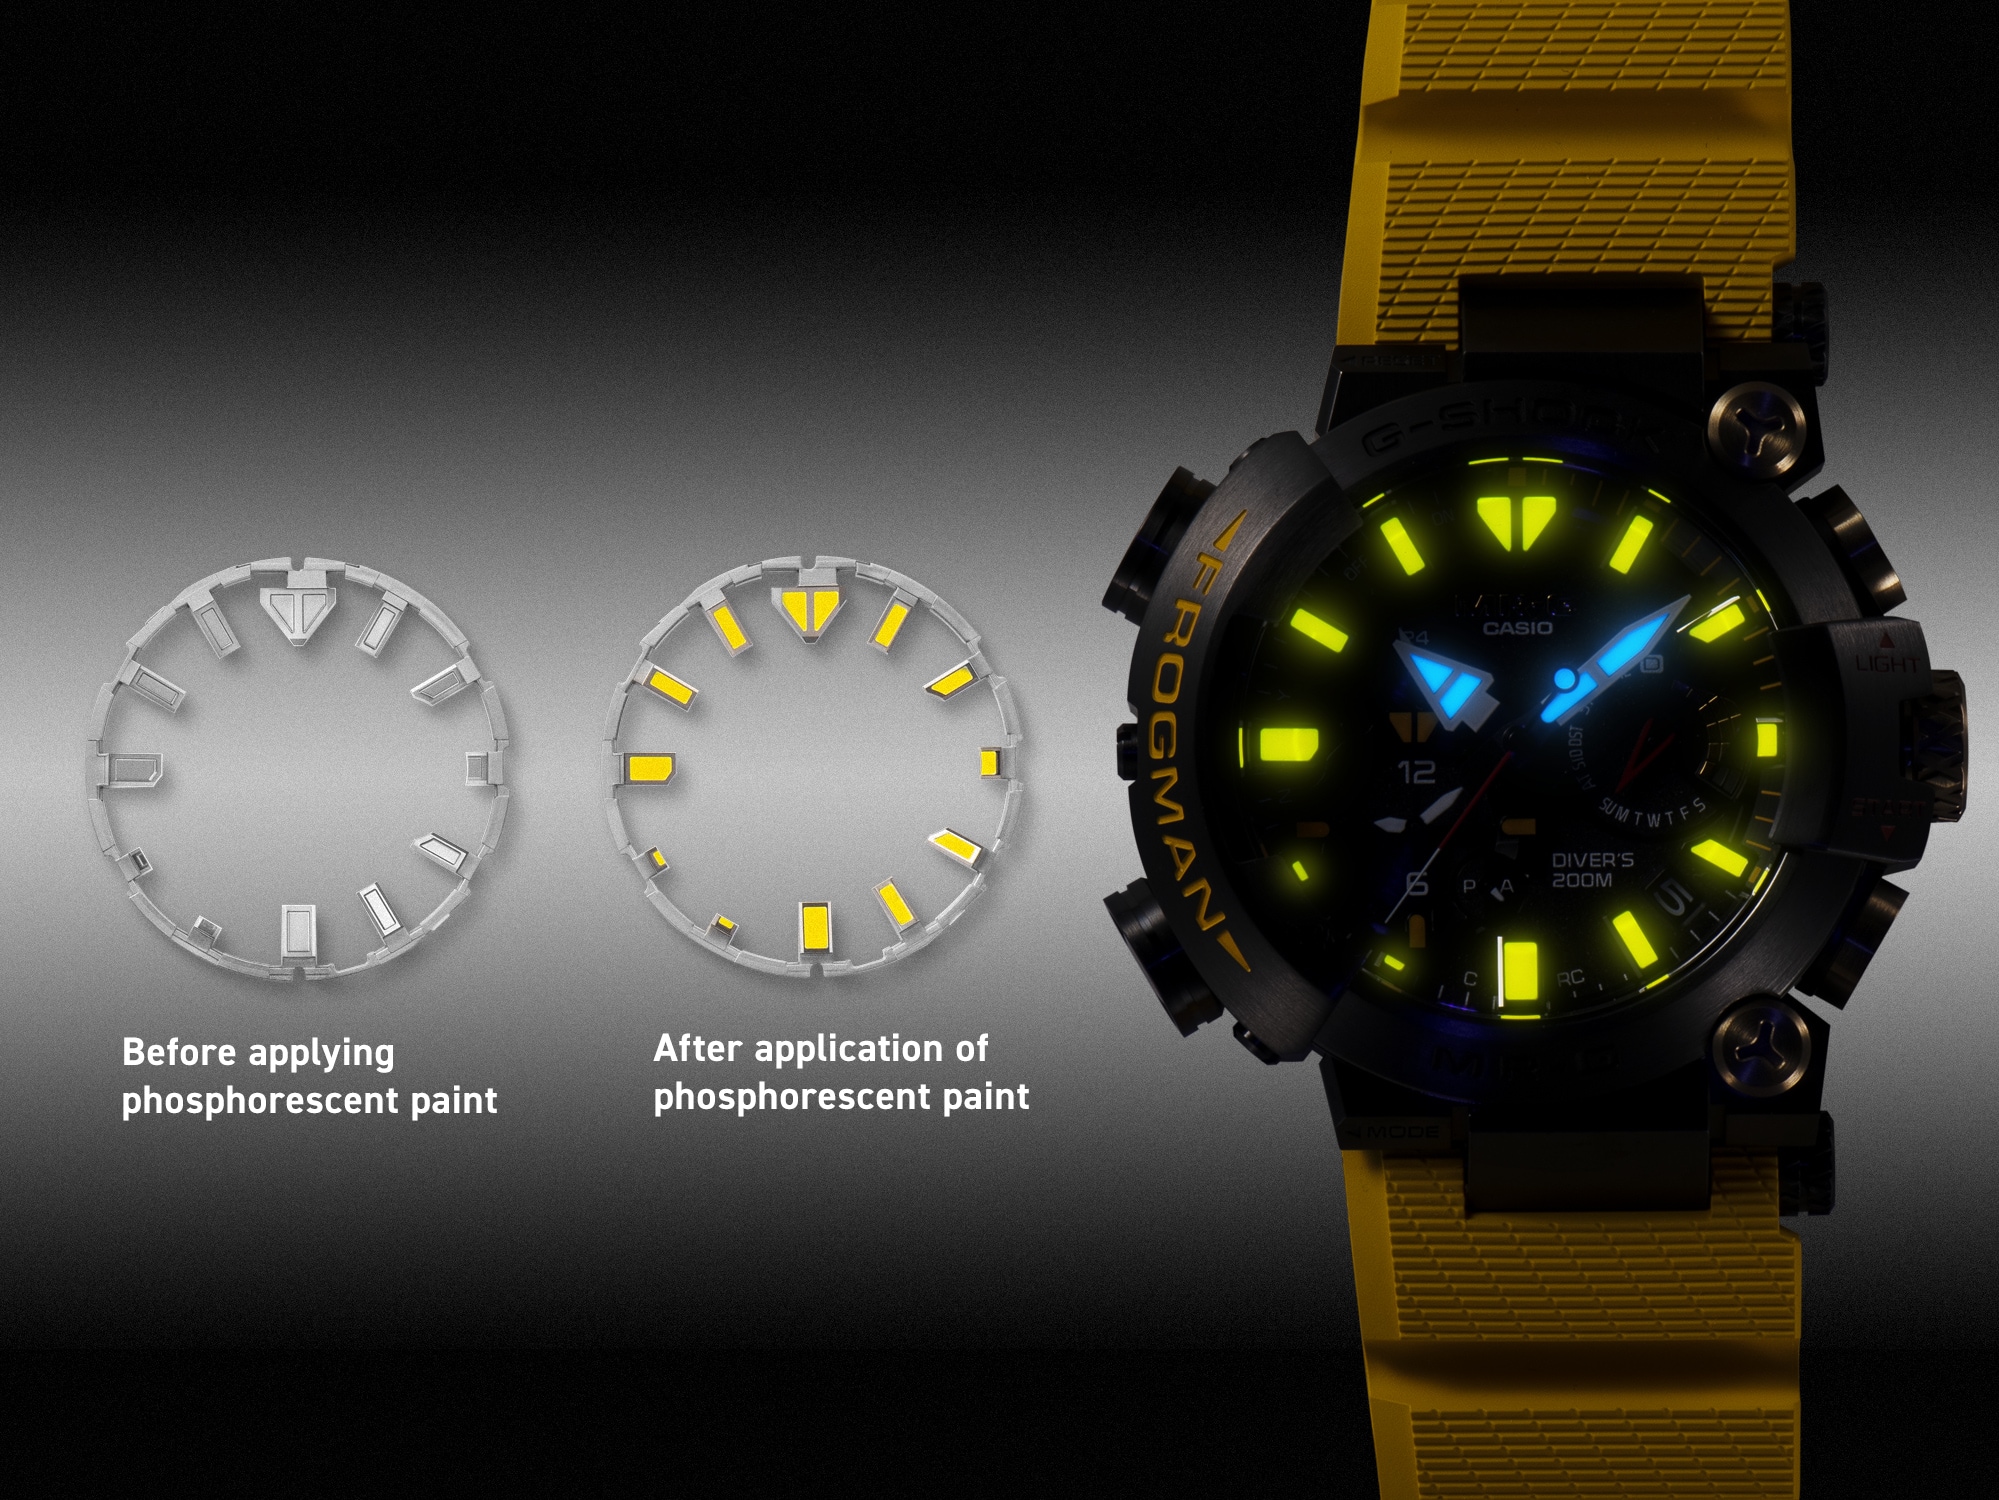 G-SHOCK mrgbf1000e-1a9 with yellow hour and minute markers